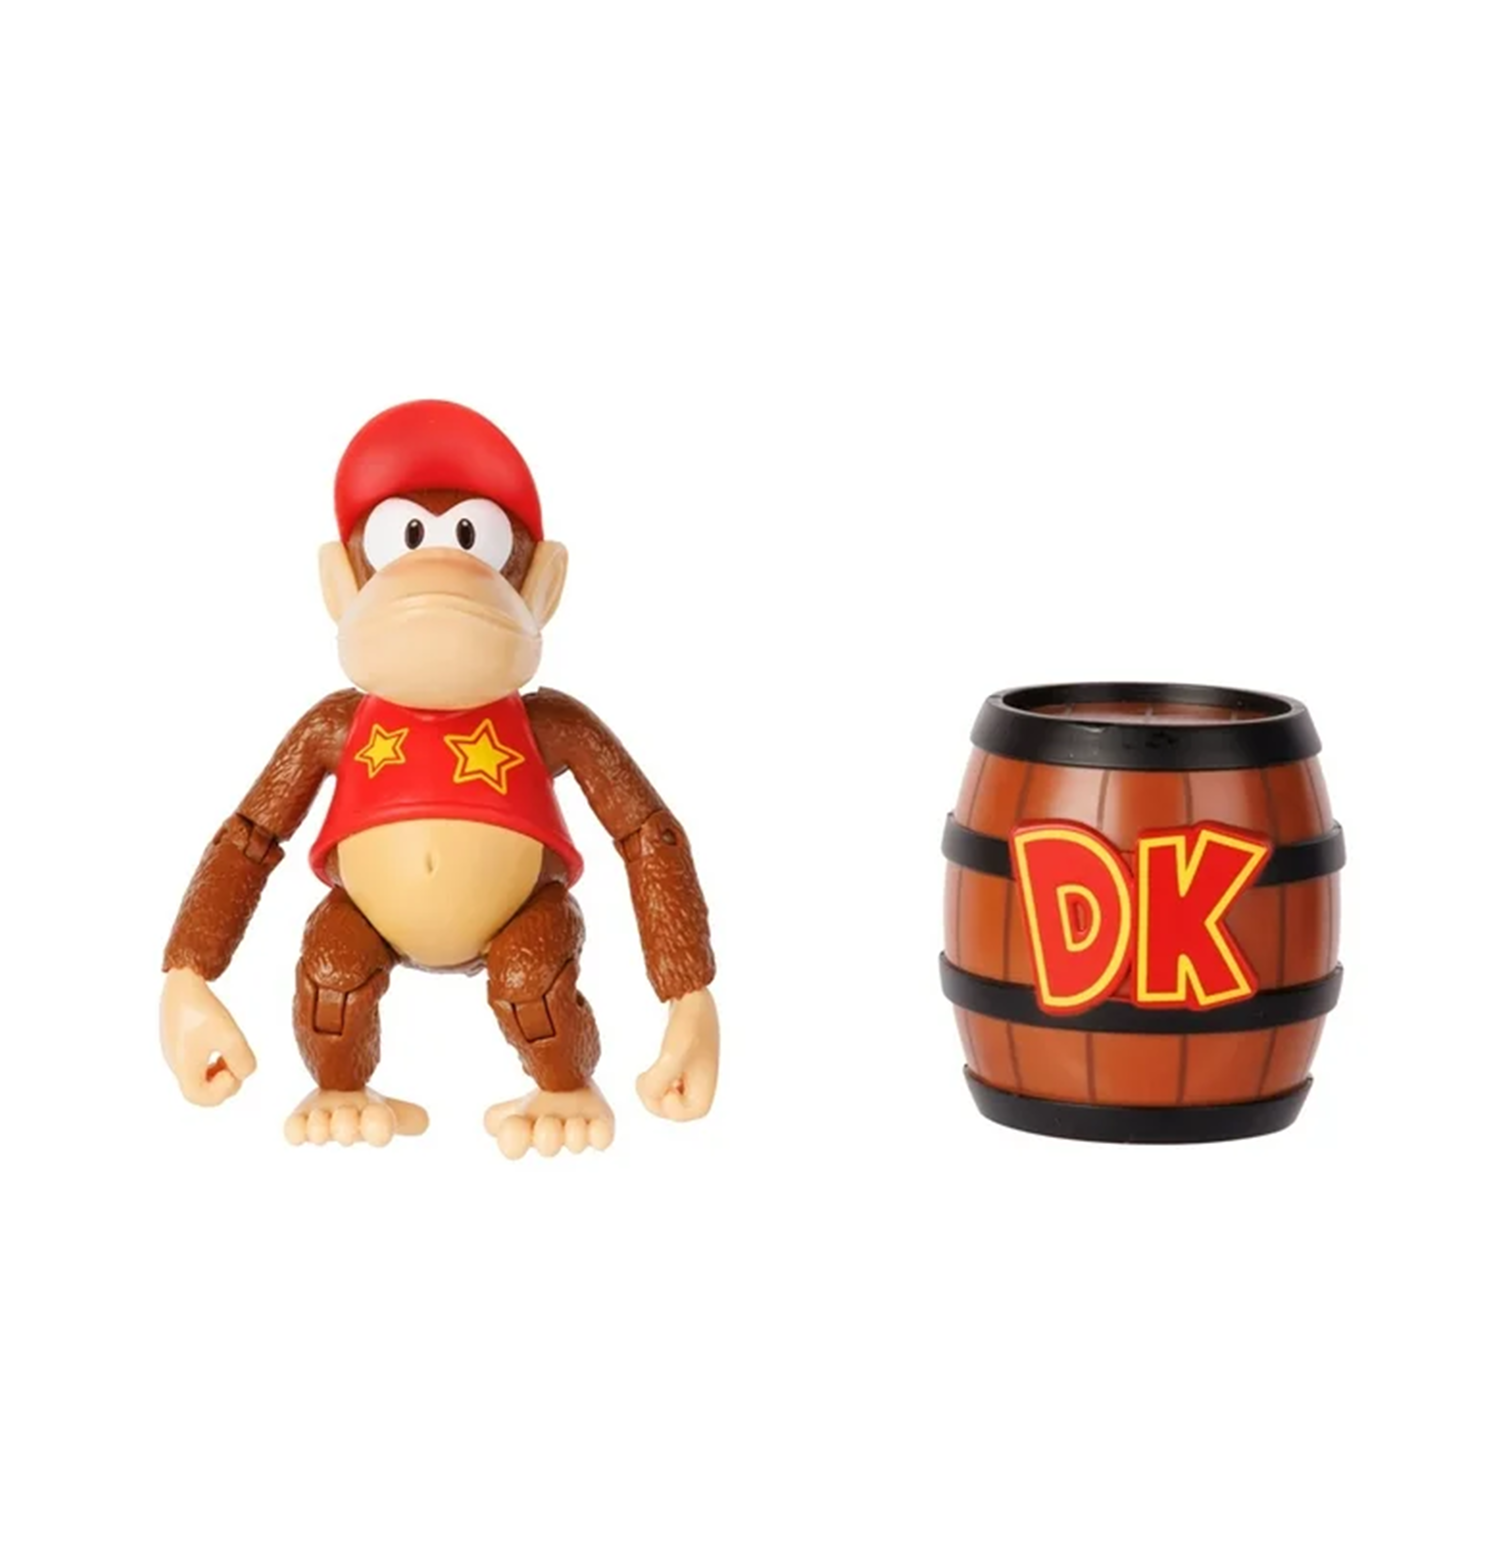 World of Nintendo 4" Diddy Kong with DK Barrel Action Figure